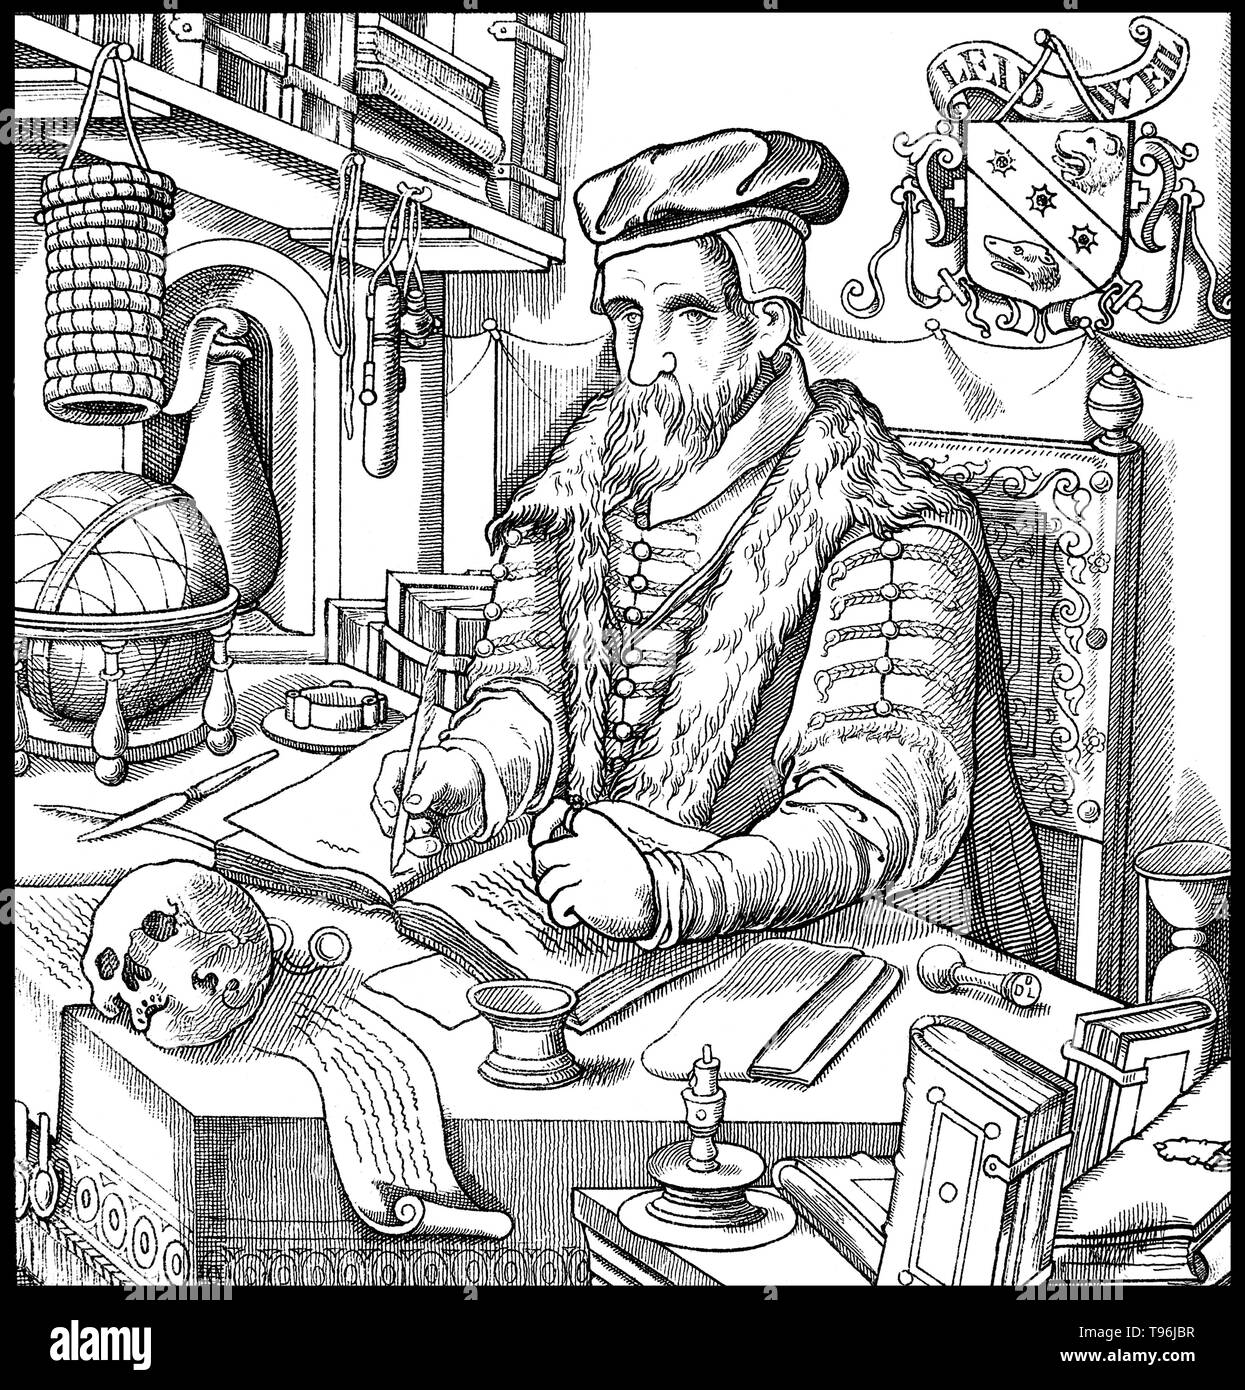 Duncan Liddel (1561 - December 17, 1613) was a Scottish mathematician, physician and astronomer. Liddel was reputed as a mathematician in Germany, where he was said to have been the first to teach the astronomy of Copernicus and of Tycho Brahe side by side with the Ptolemaic system. Caselius considered that Liddel was the first teacher of Brahe's system; and Brahe complained of plagiarism. Stock Photo